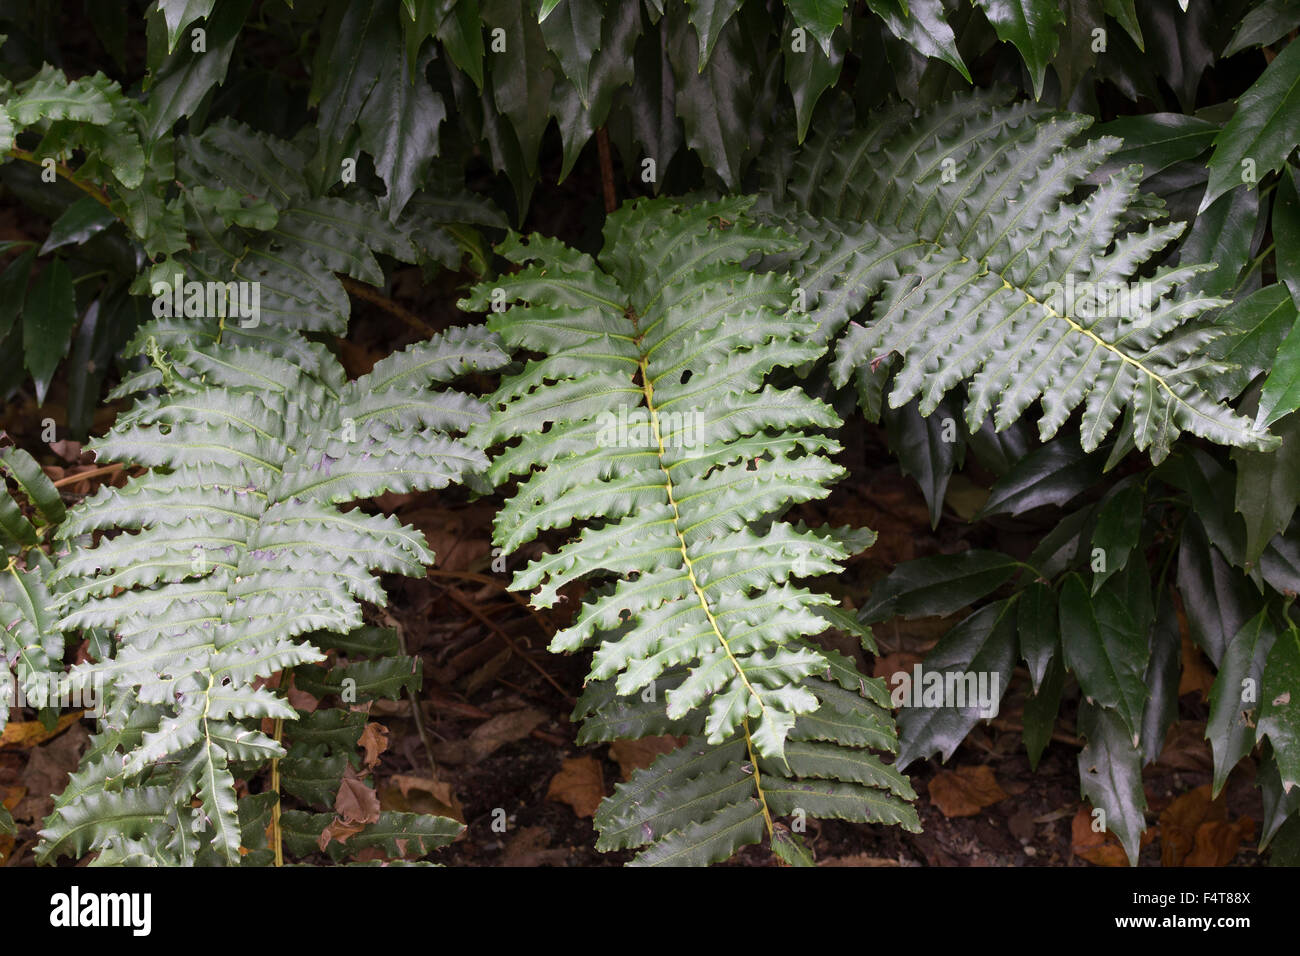 Leathery evergreen fronds of the Chilean hard fern, Blechnum chilense Stock Photo